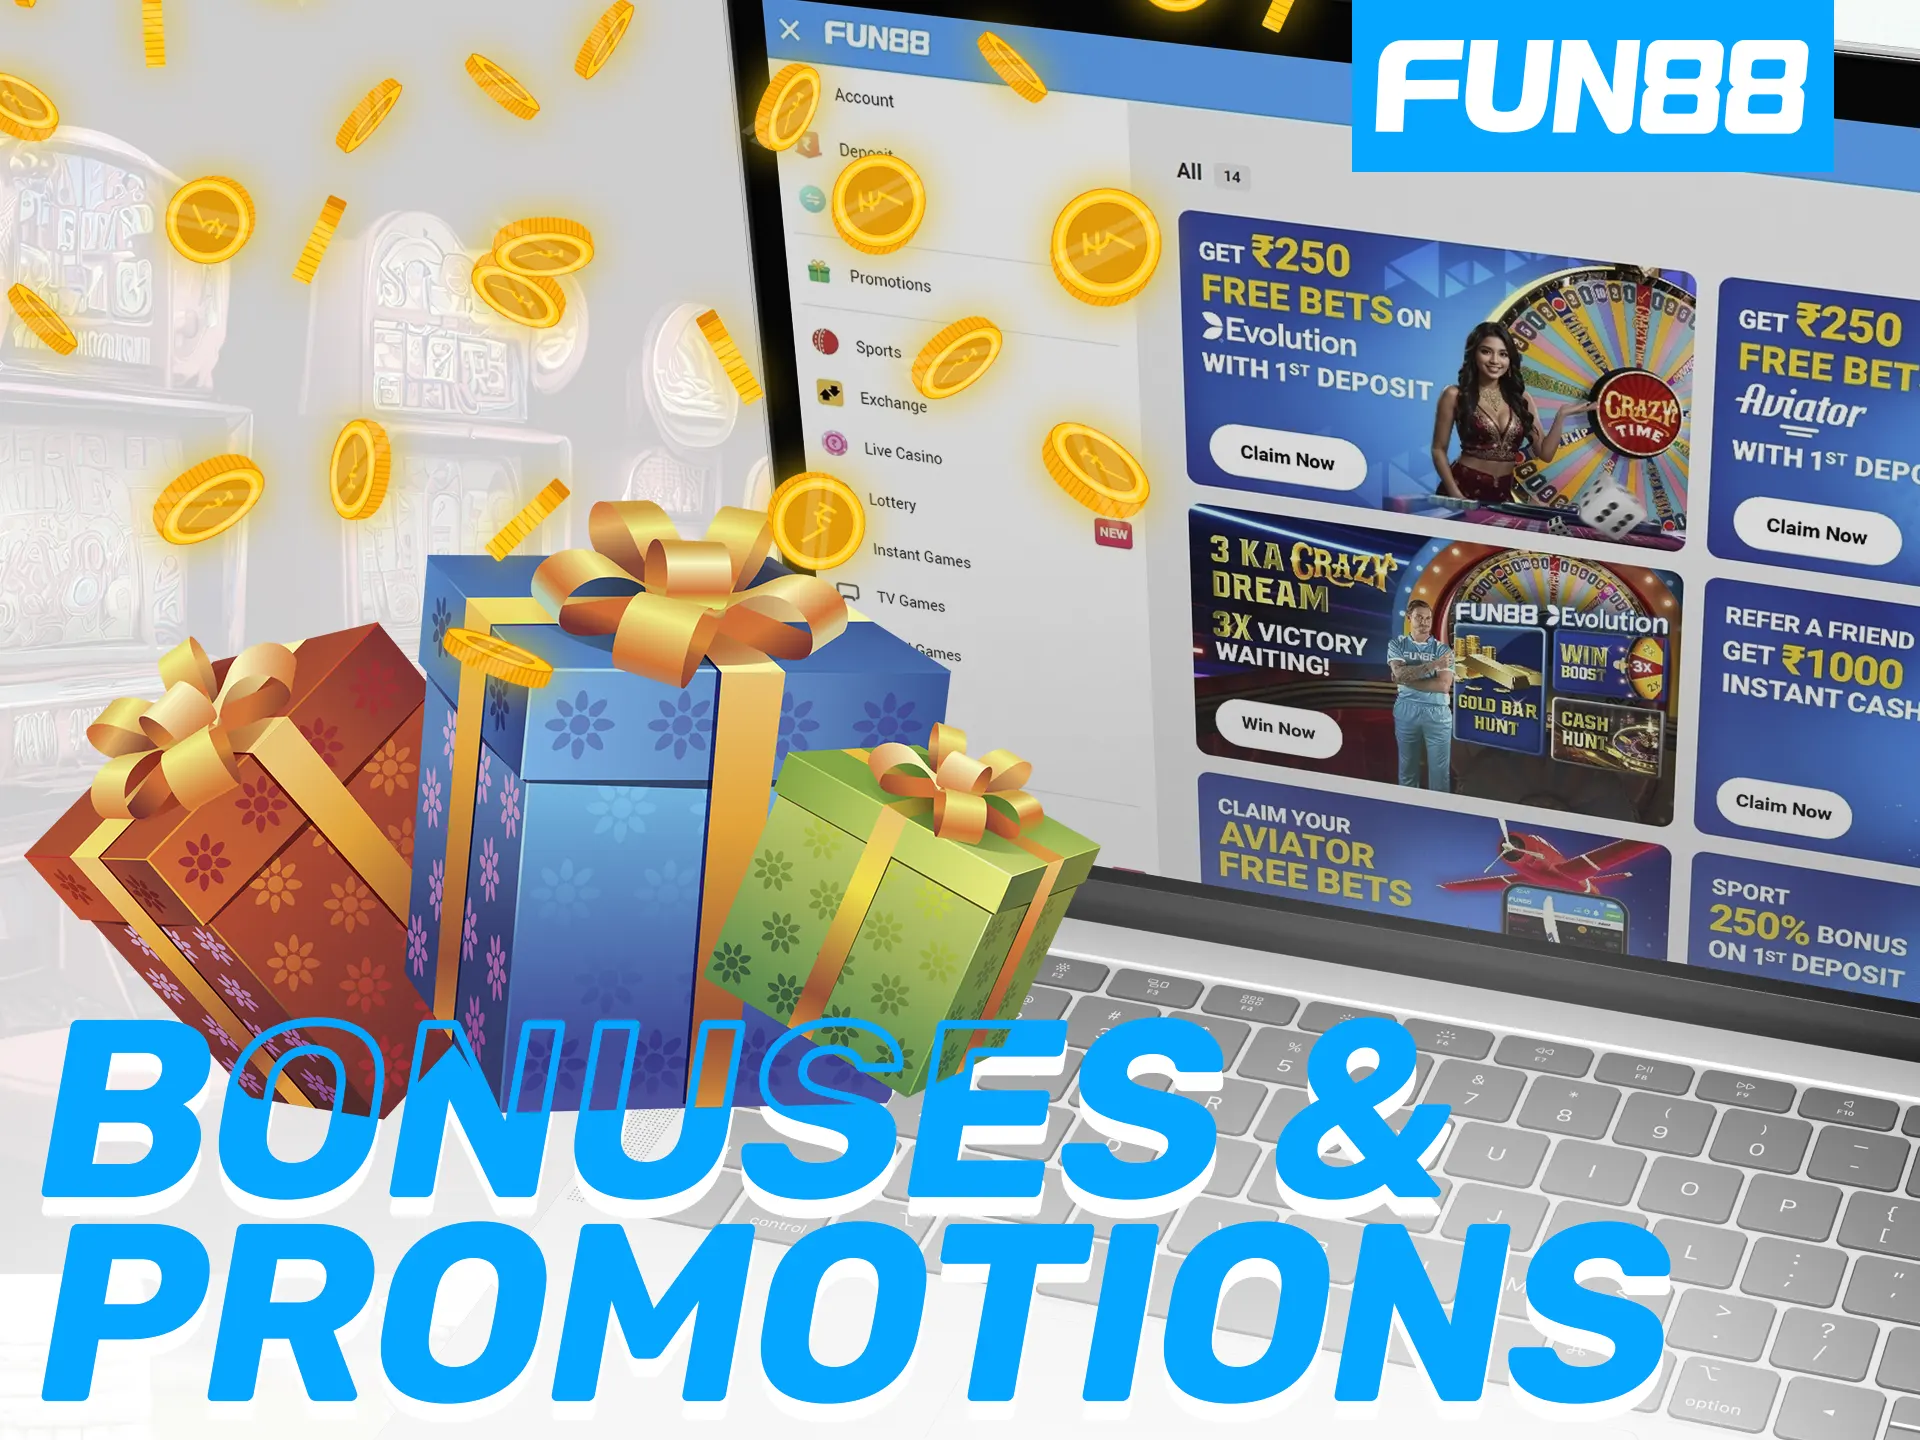 Fun88 offers diverse bonuses for new and existing users, including deposit boosts.